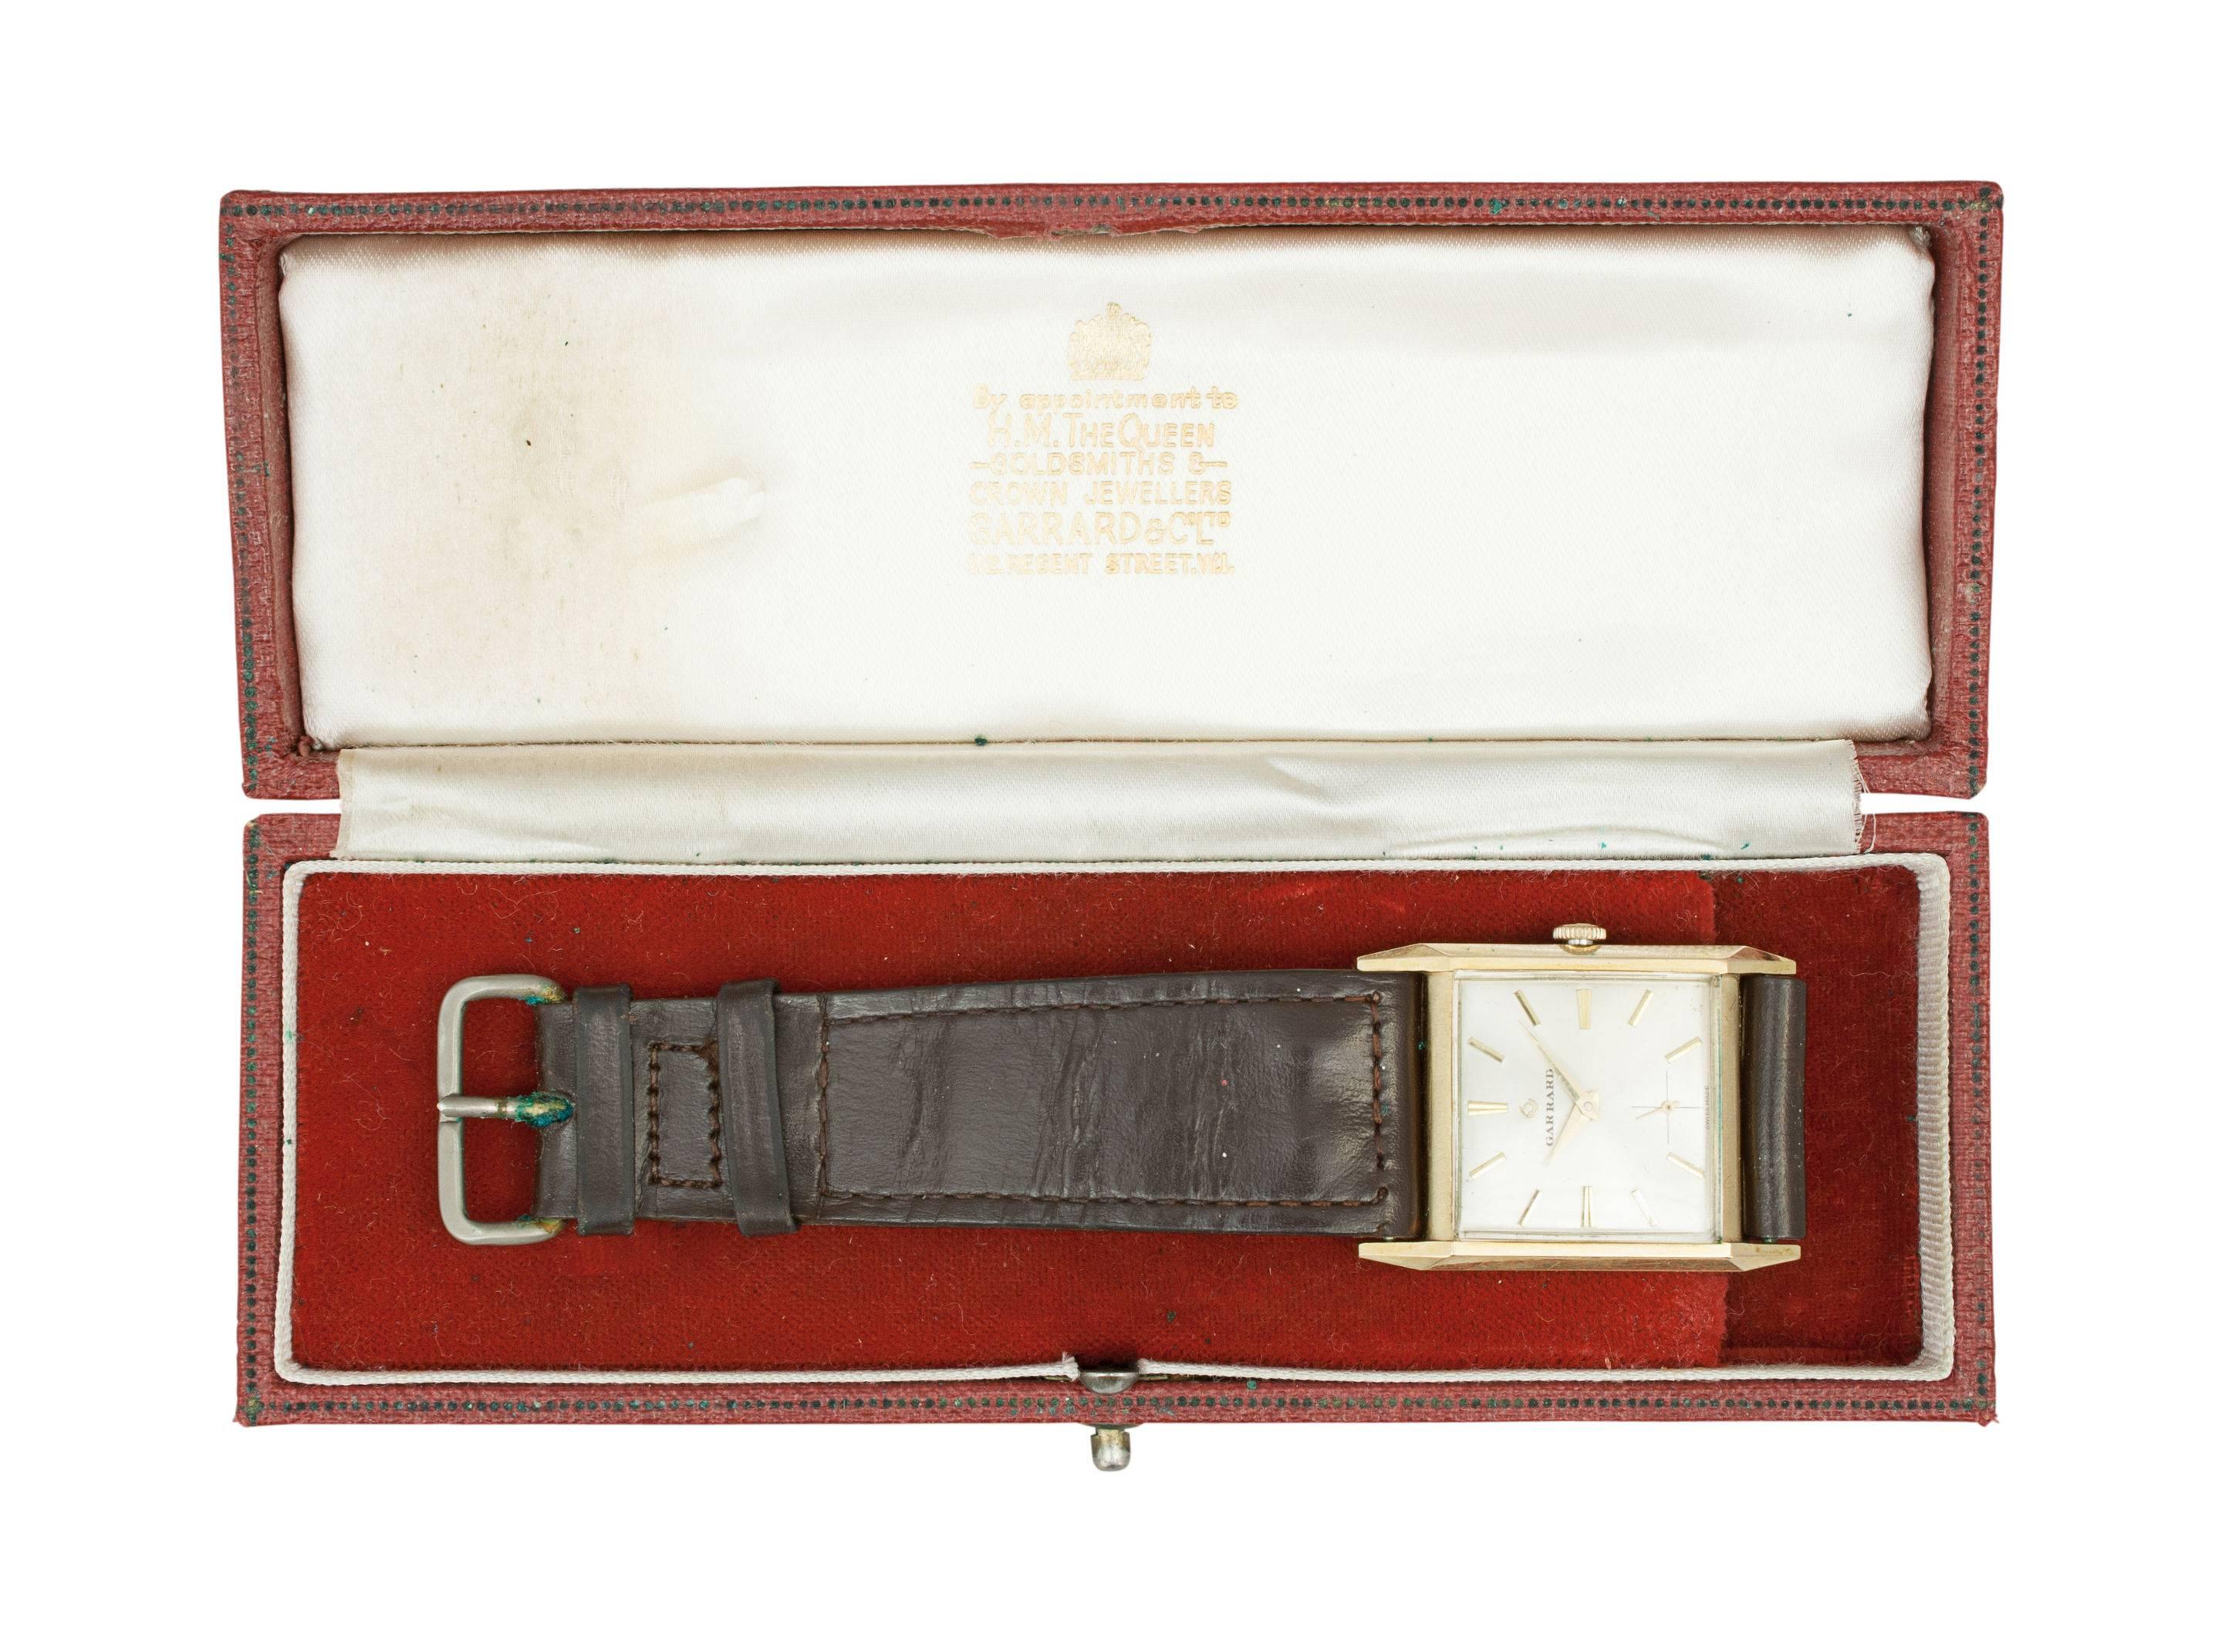 Gentleman's Garrard 9-carat gold wrist watch. 
9-carat gold Swiss mechanical wrist watch made by the world renowned premier maker Garrard, the Crown Jewelers. The watch is in its original presentation box and comes with original warranty and